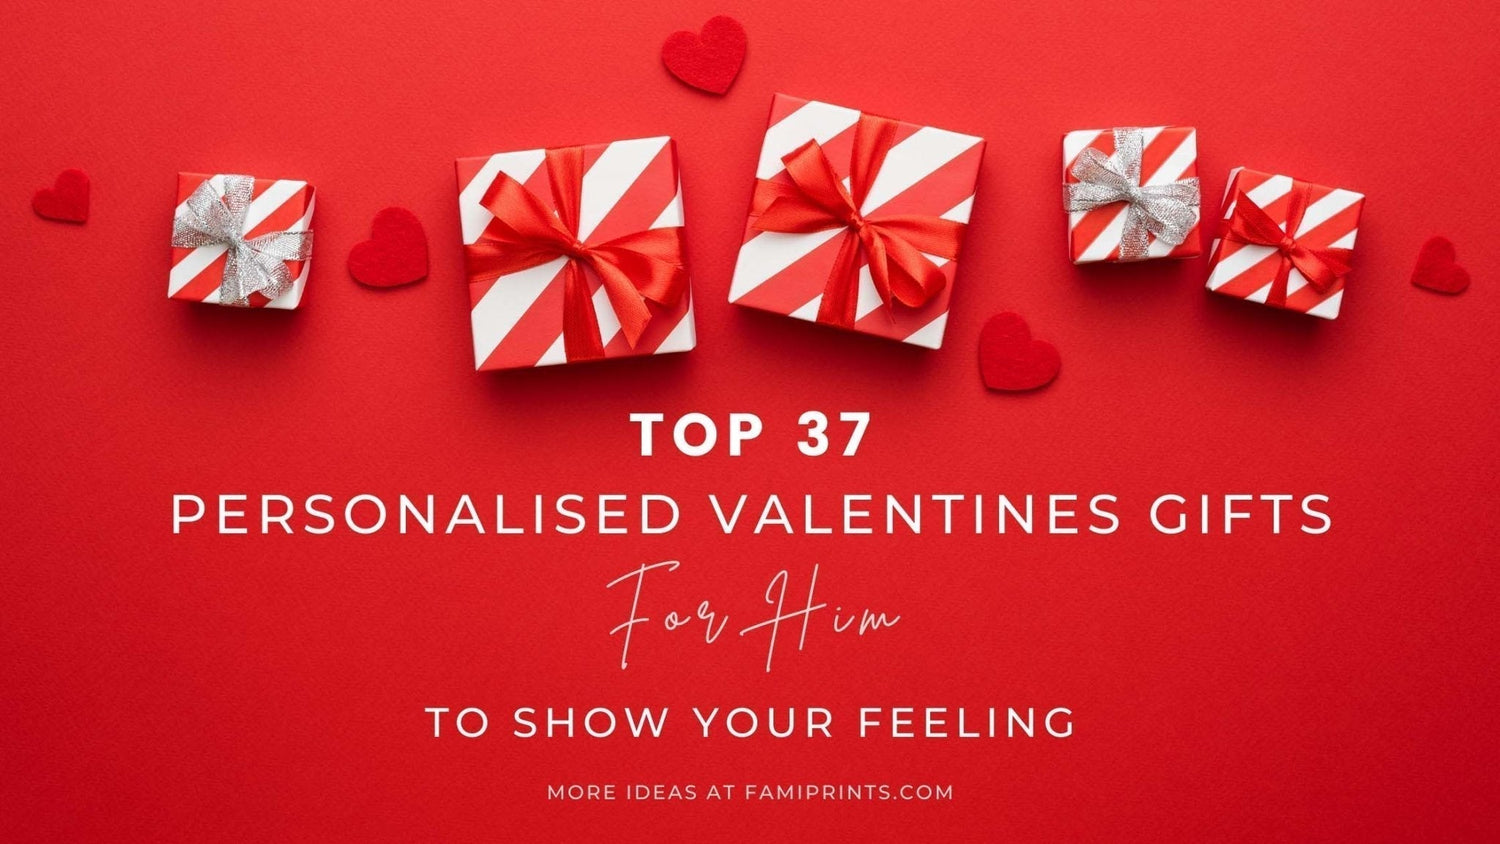 Top 37 Personalised Valentines Gifts For Him To Show Your Feeling | FamiPrints | Trending Customizable Family Gifts